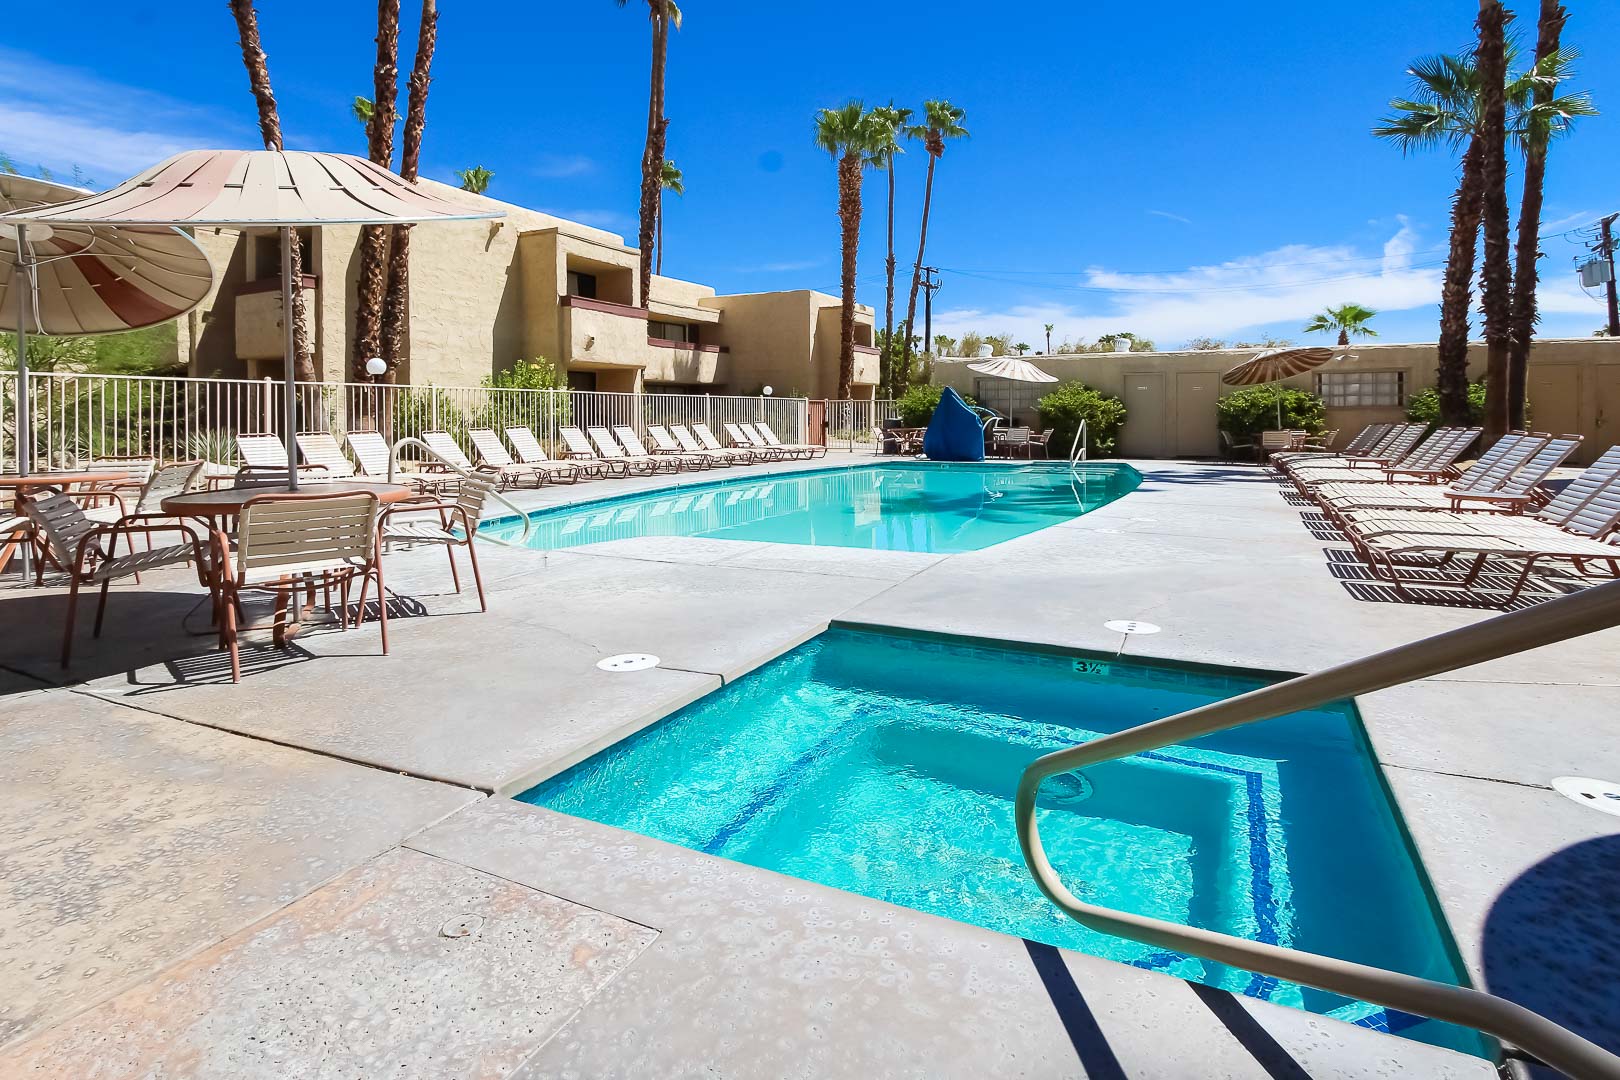 A peaceful outdoor swimming pool at VRI's Desert Vacation Villas in Palm Springs California.